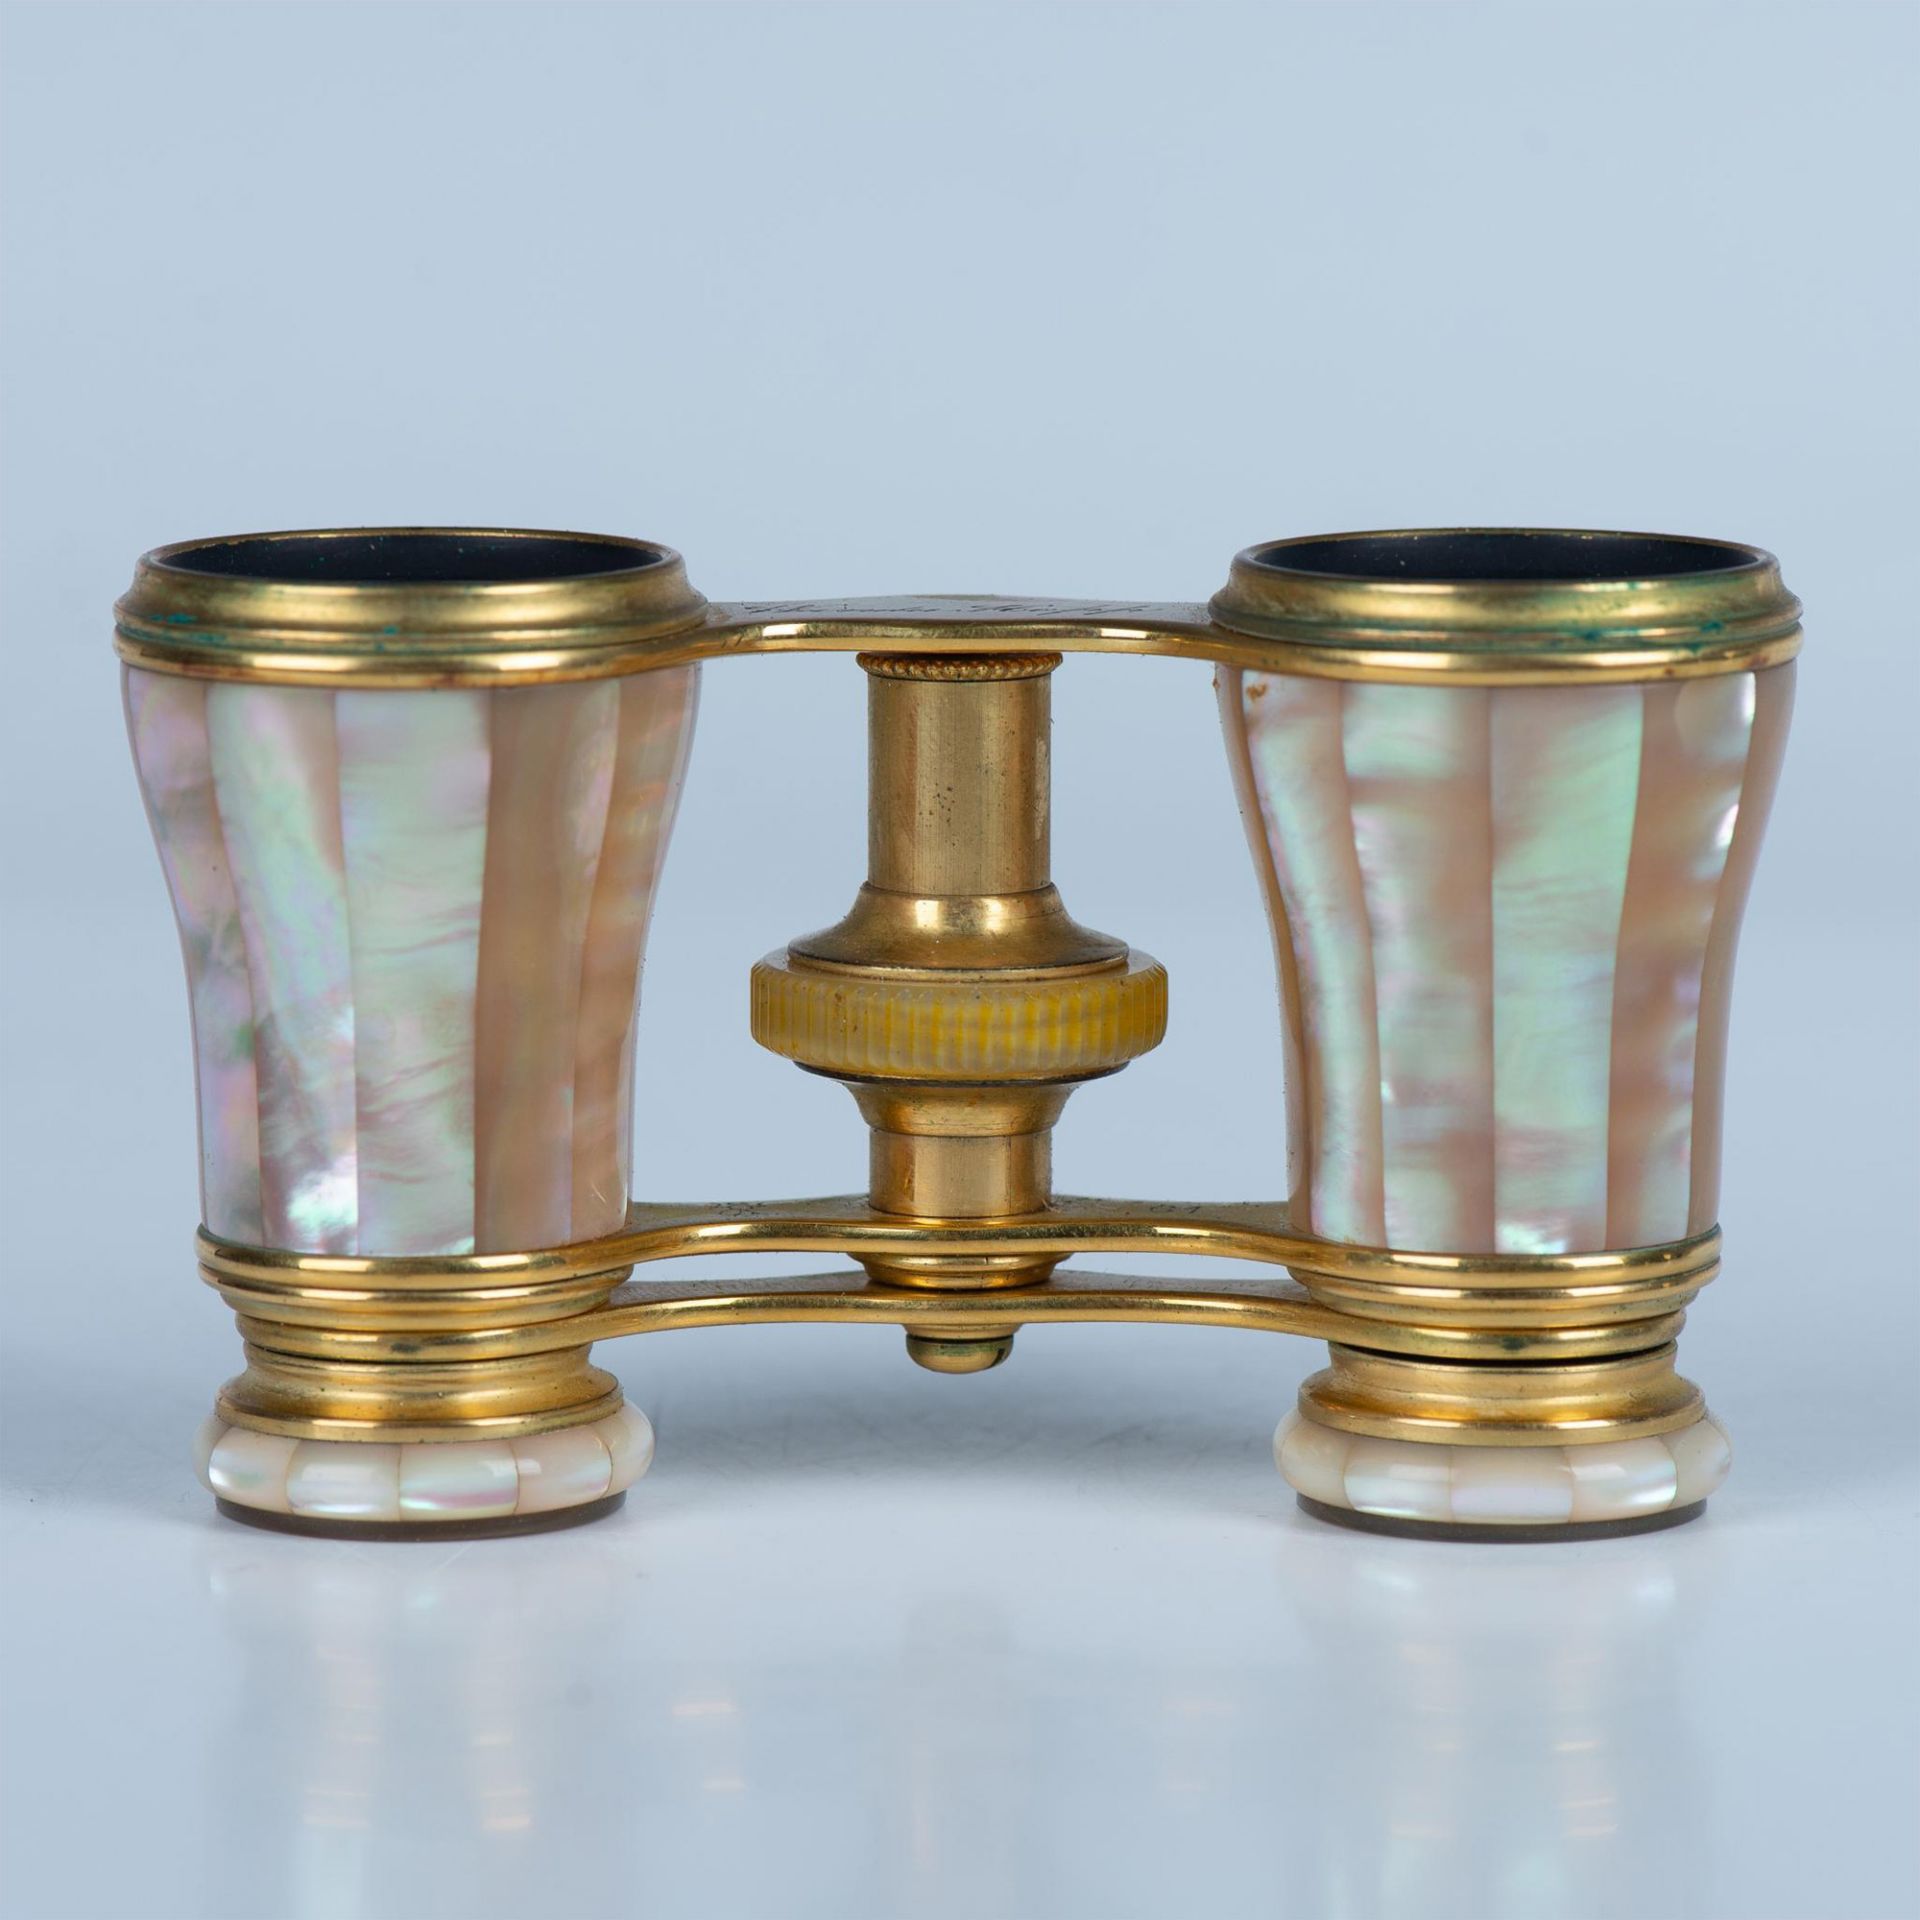 Lemaire Paris Mother of Pearl Fabt Opera Glasses & Case - Image 2 of 6